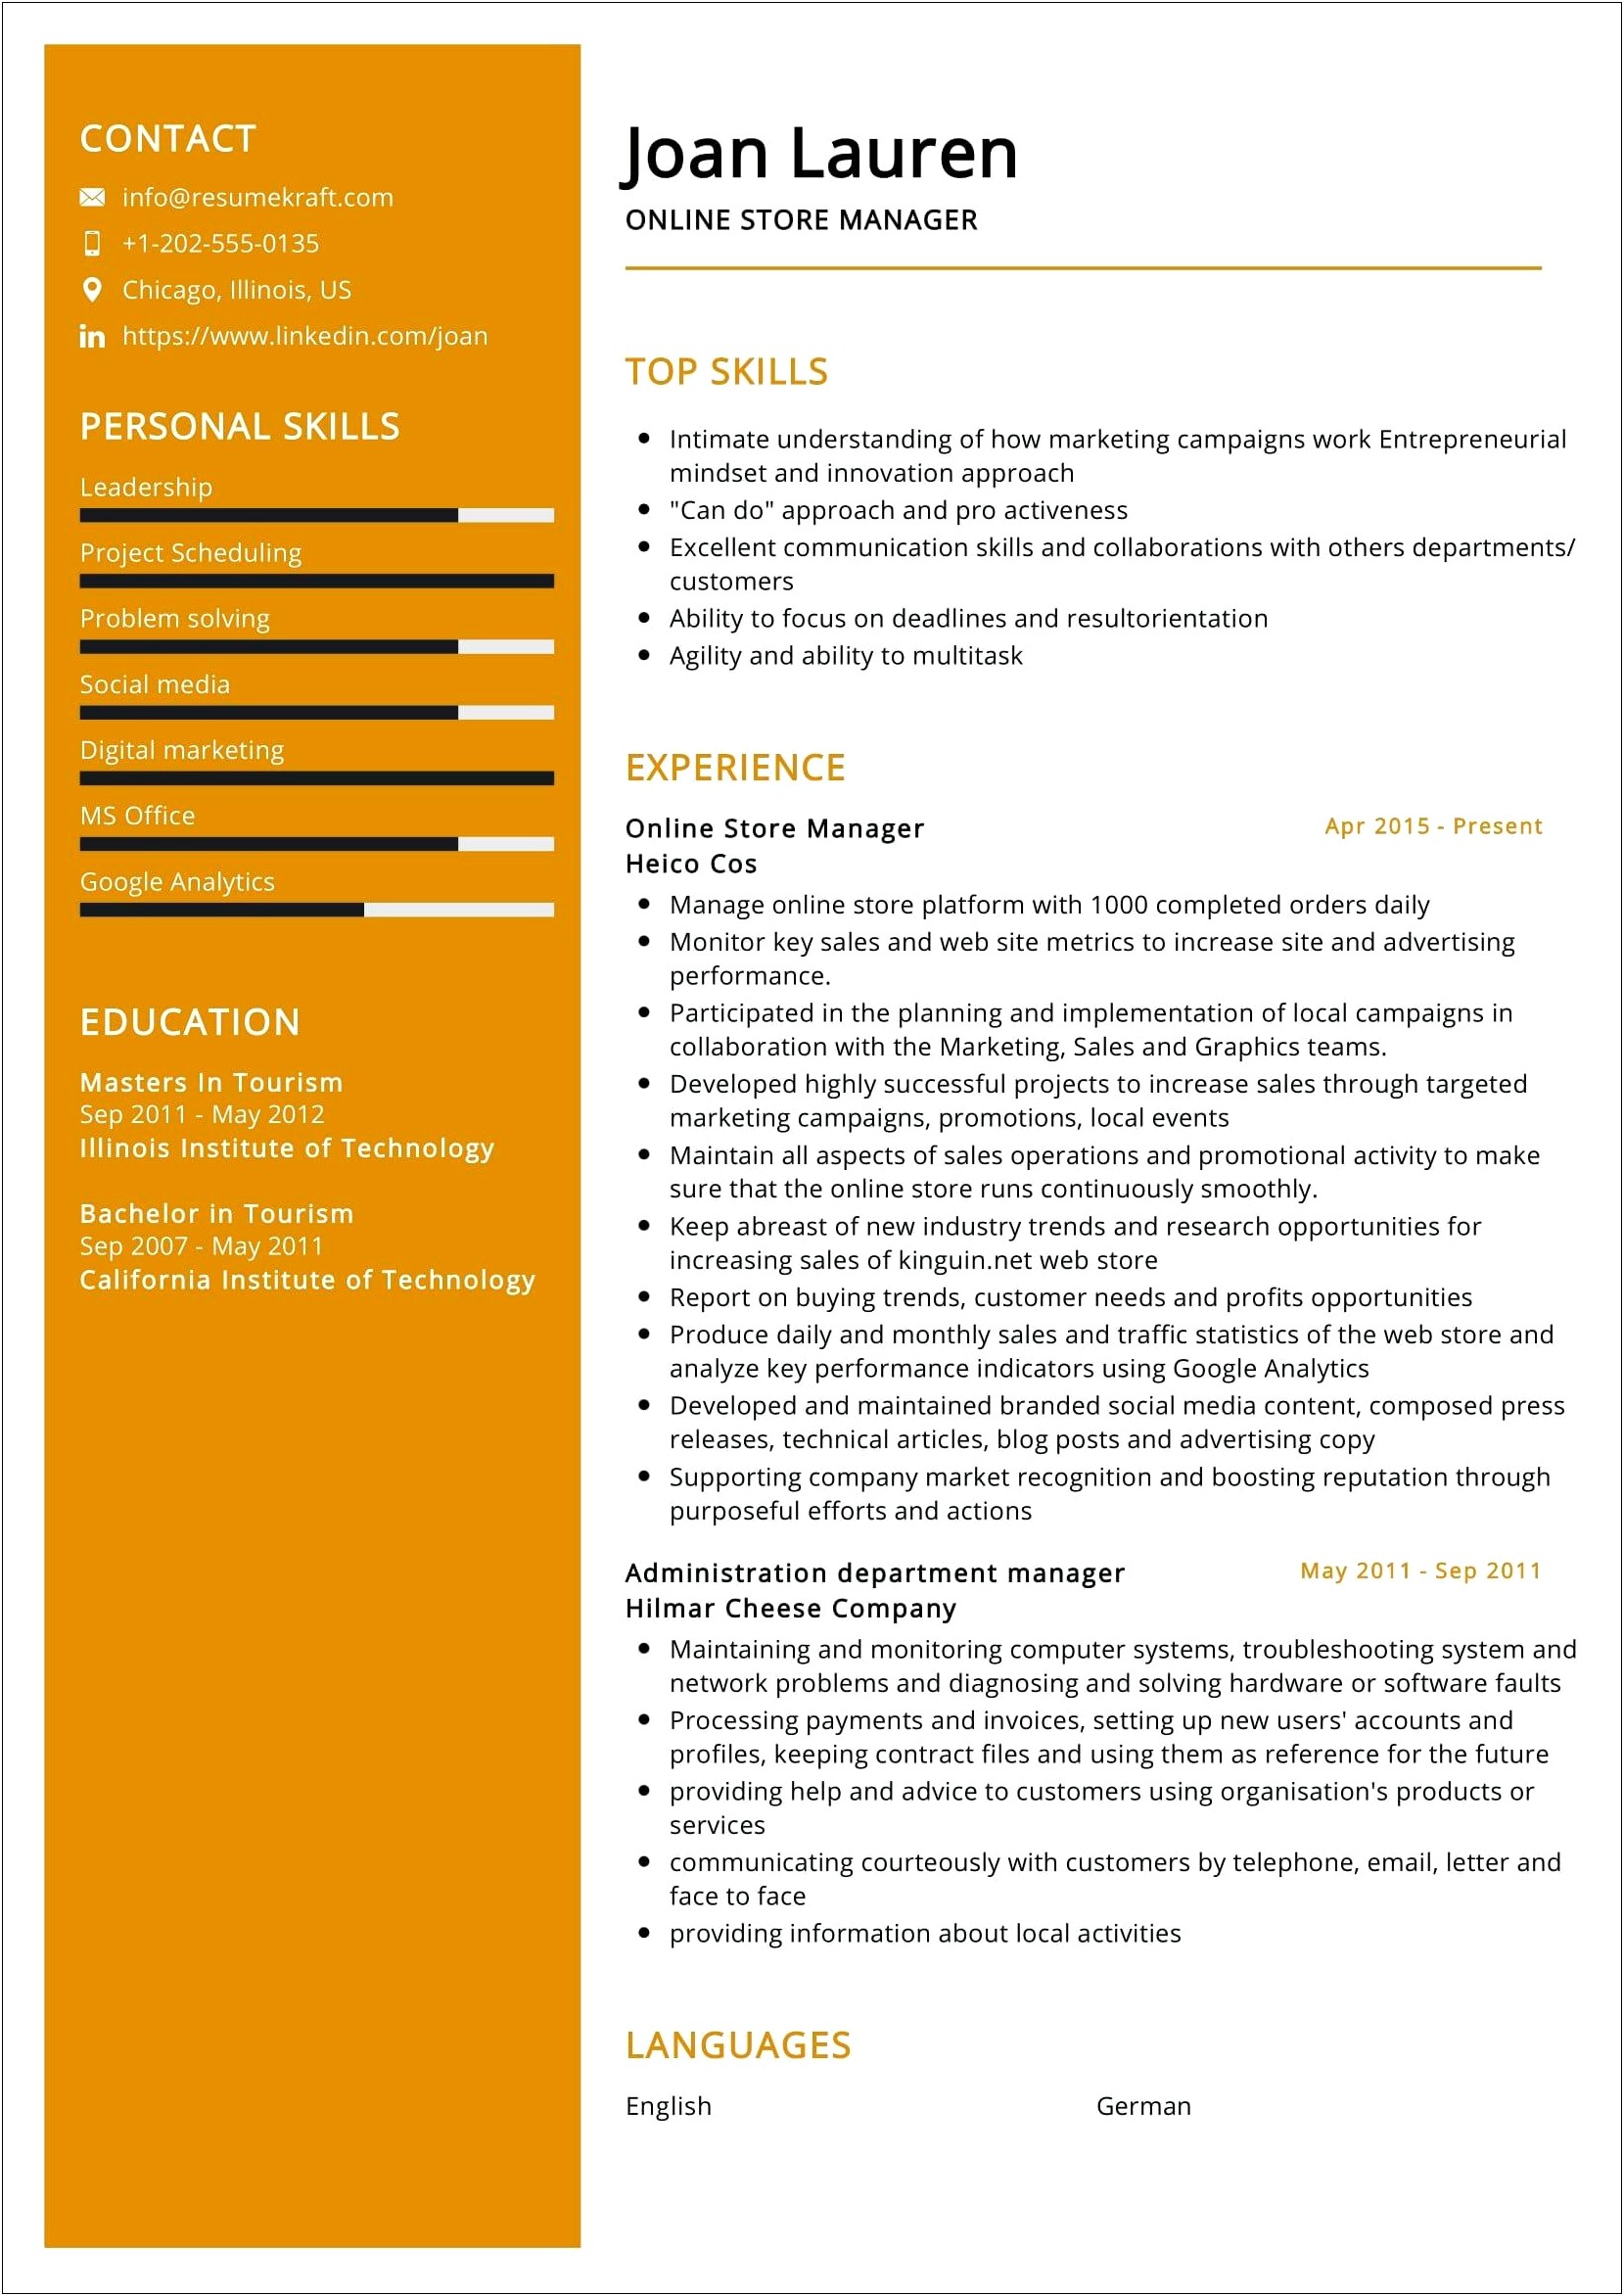 Department Store Manager Resume With Key Accomplishments